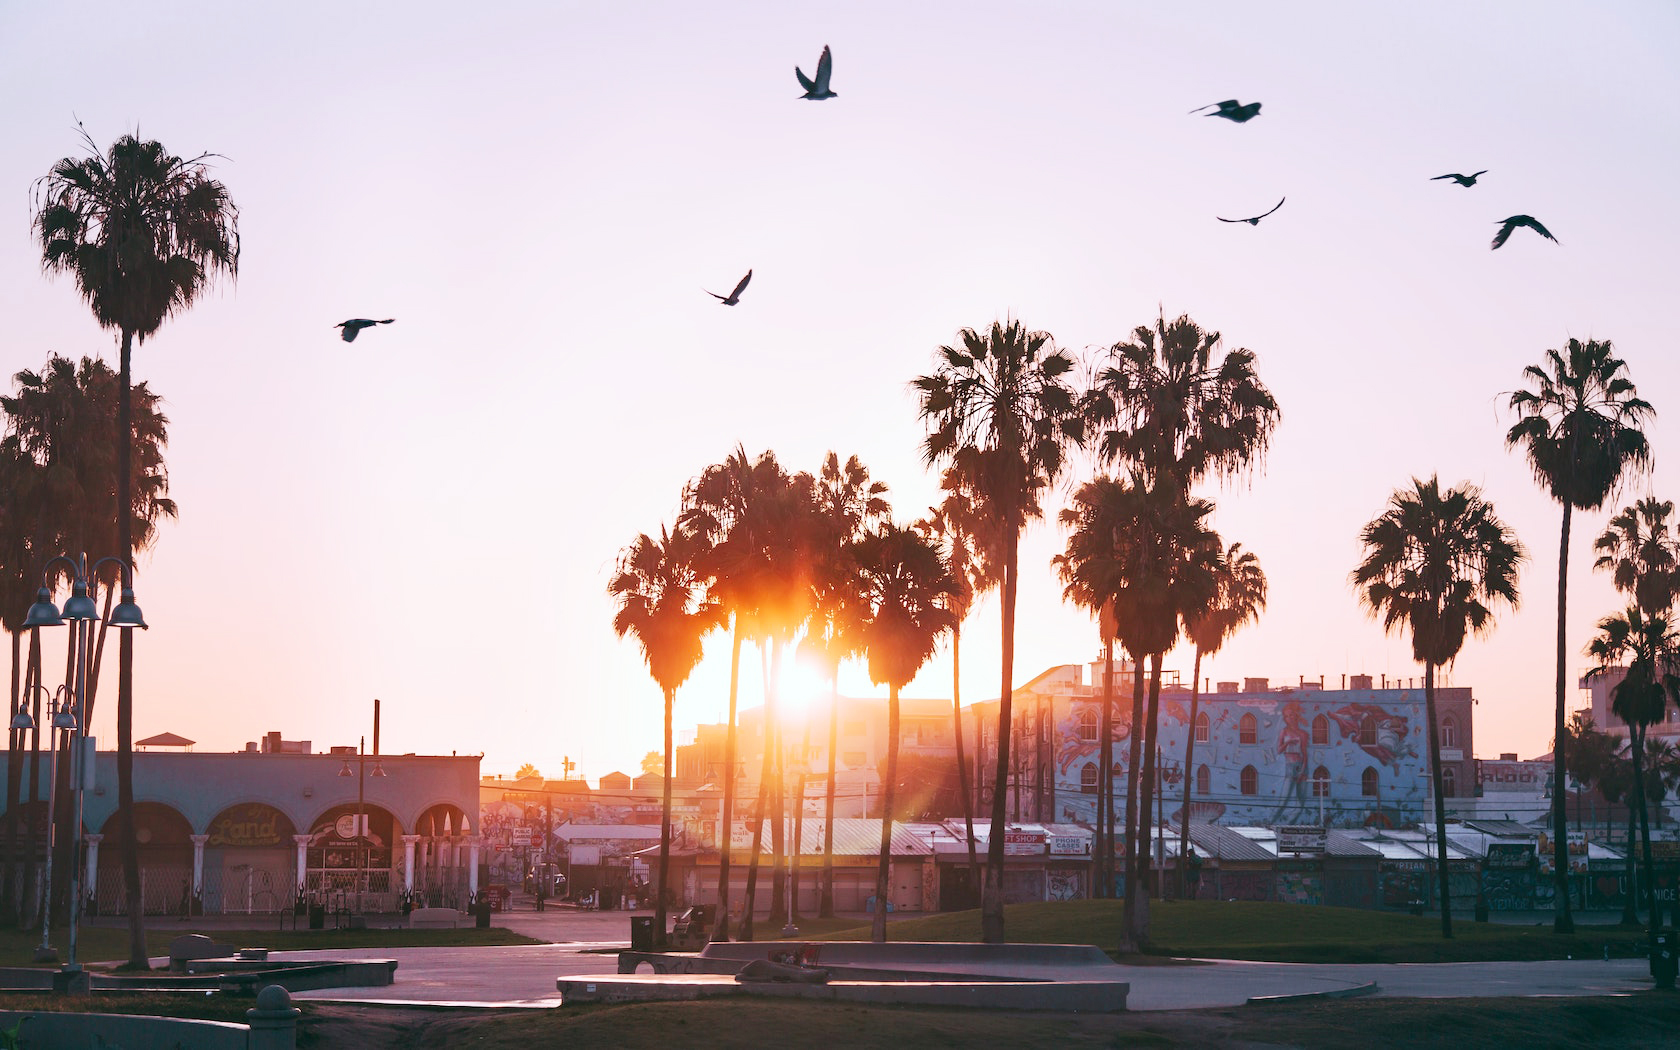 Cheap Flights: Fly From Sydney To California For $662 Return